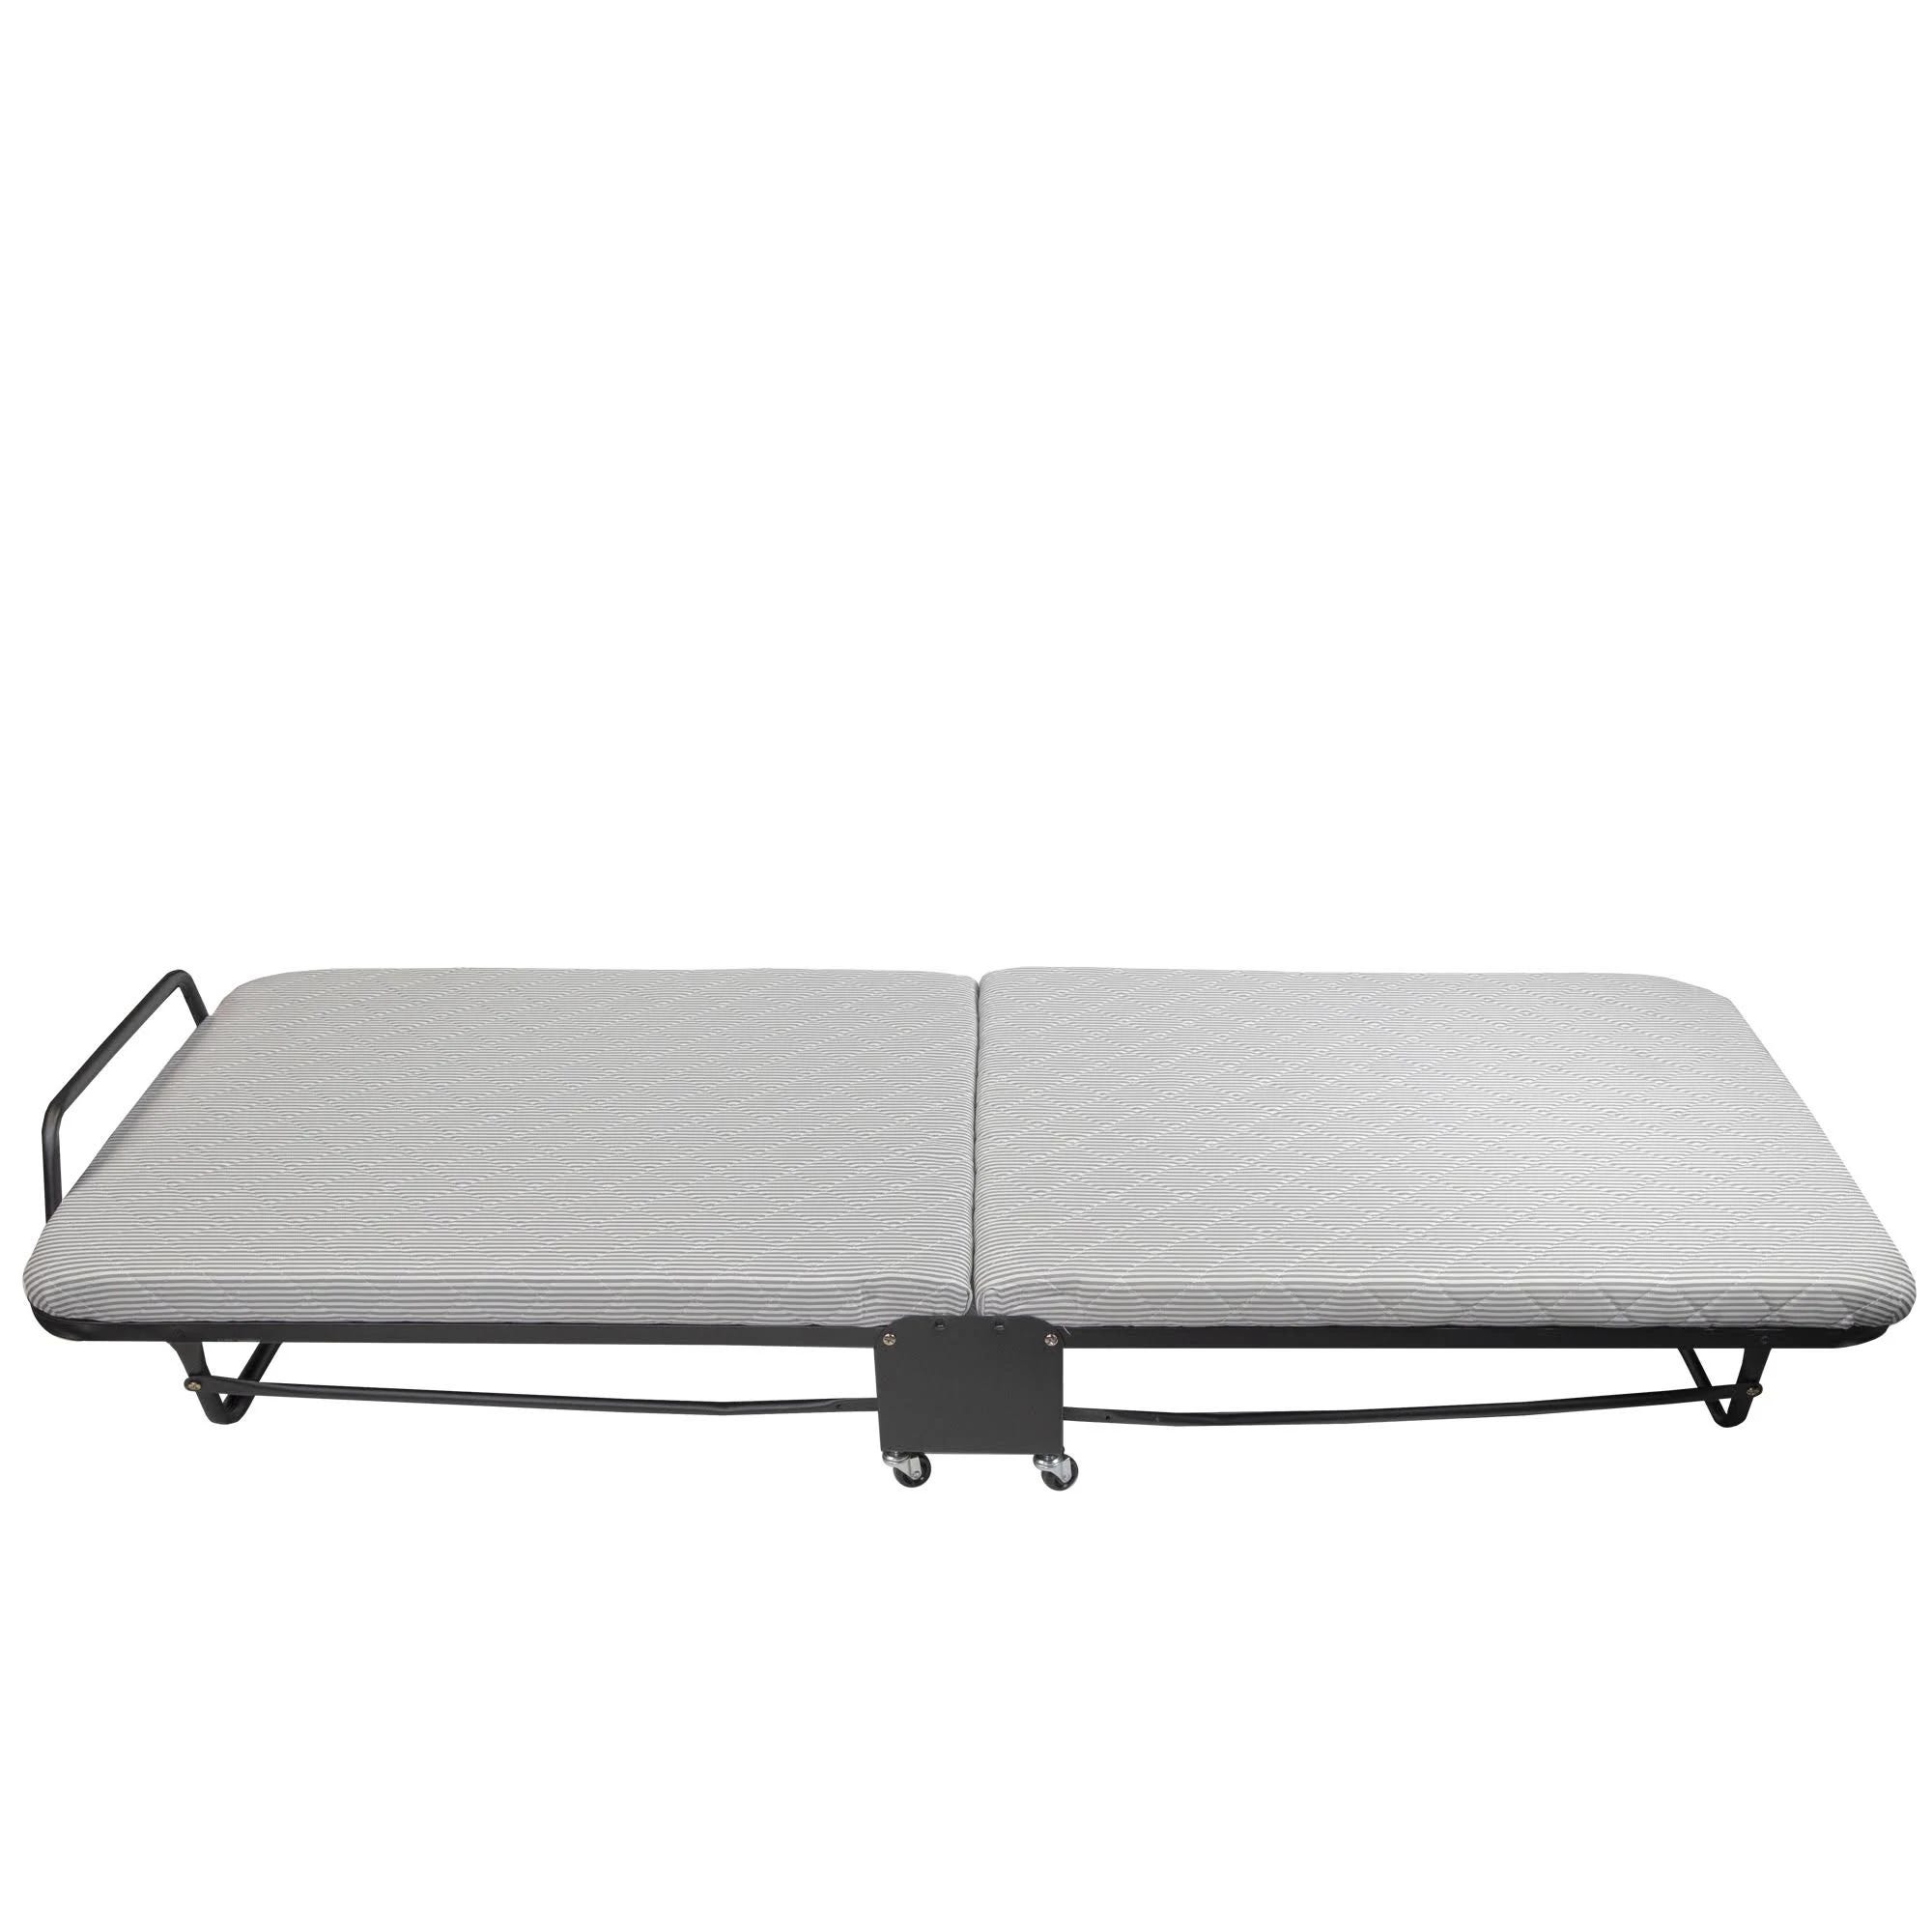 Portable Folding Guest Bed for Comfort and Flexibility | Image